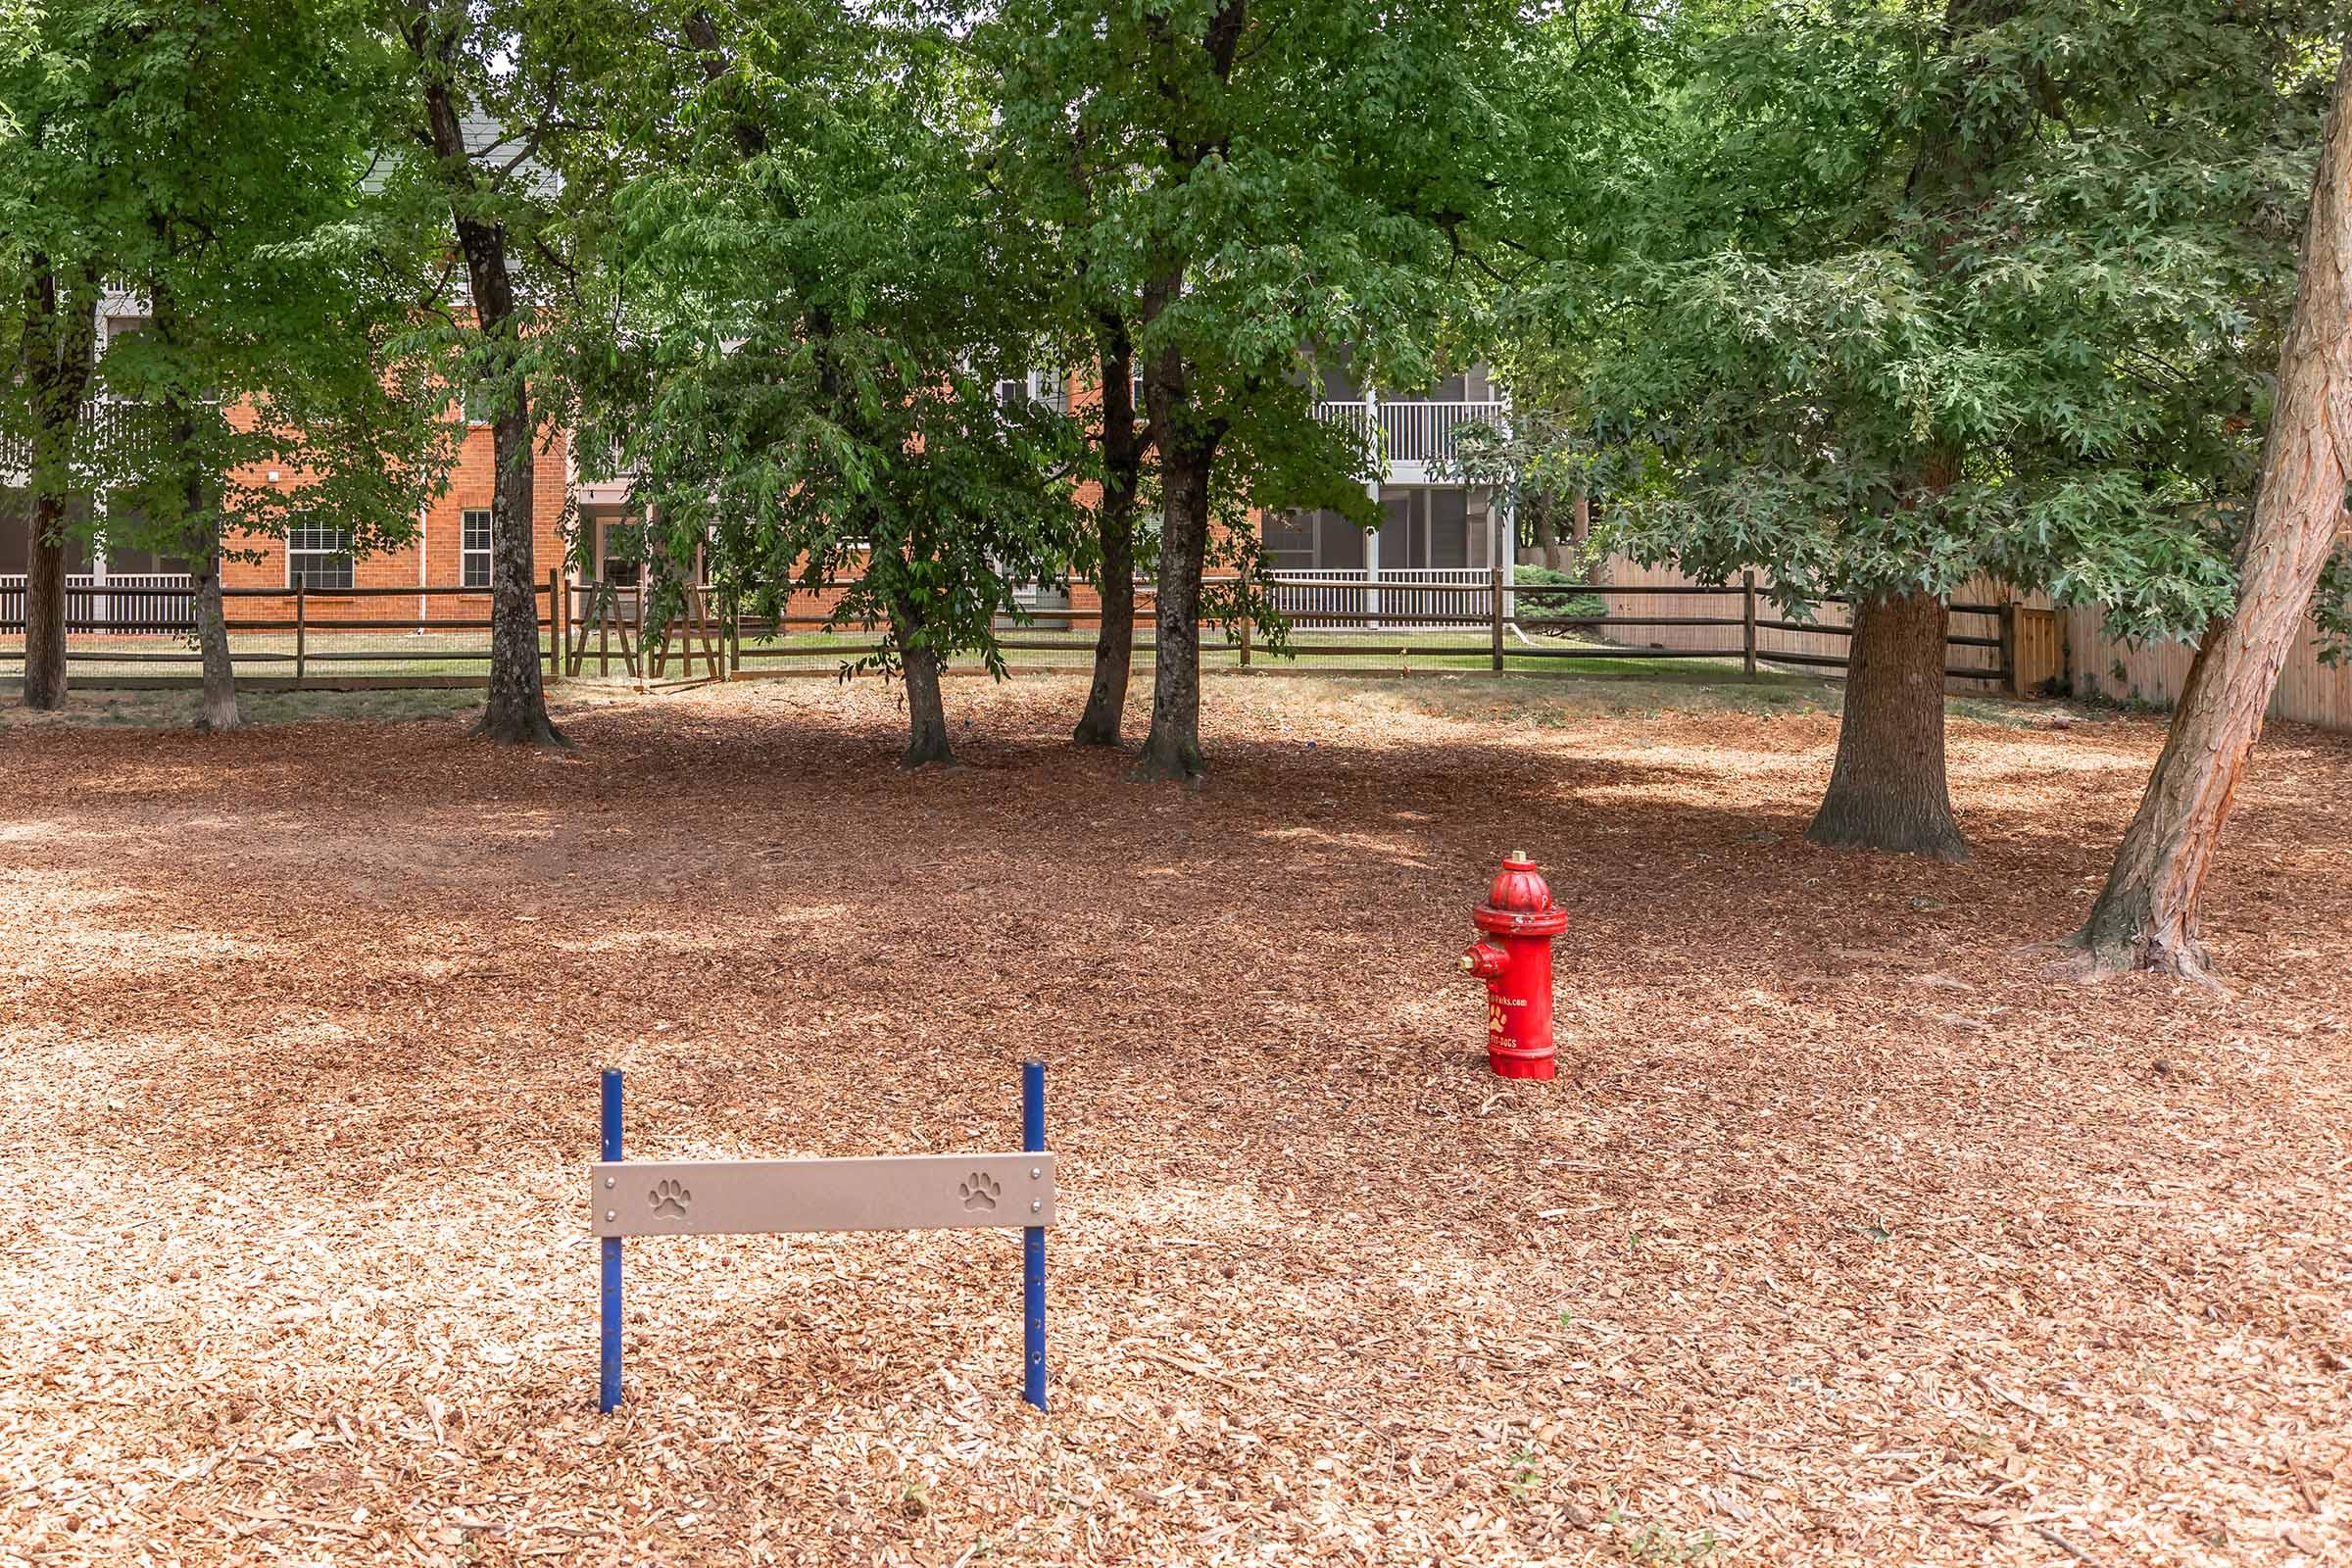 a fire hydrant in the middle of a park